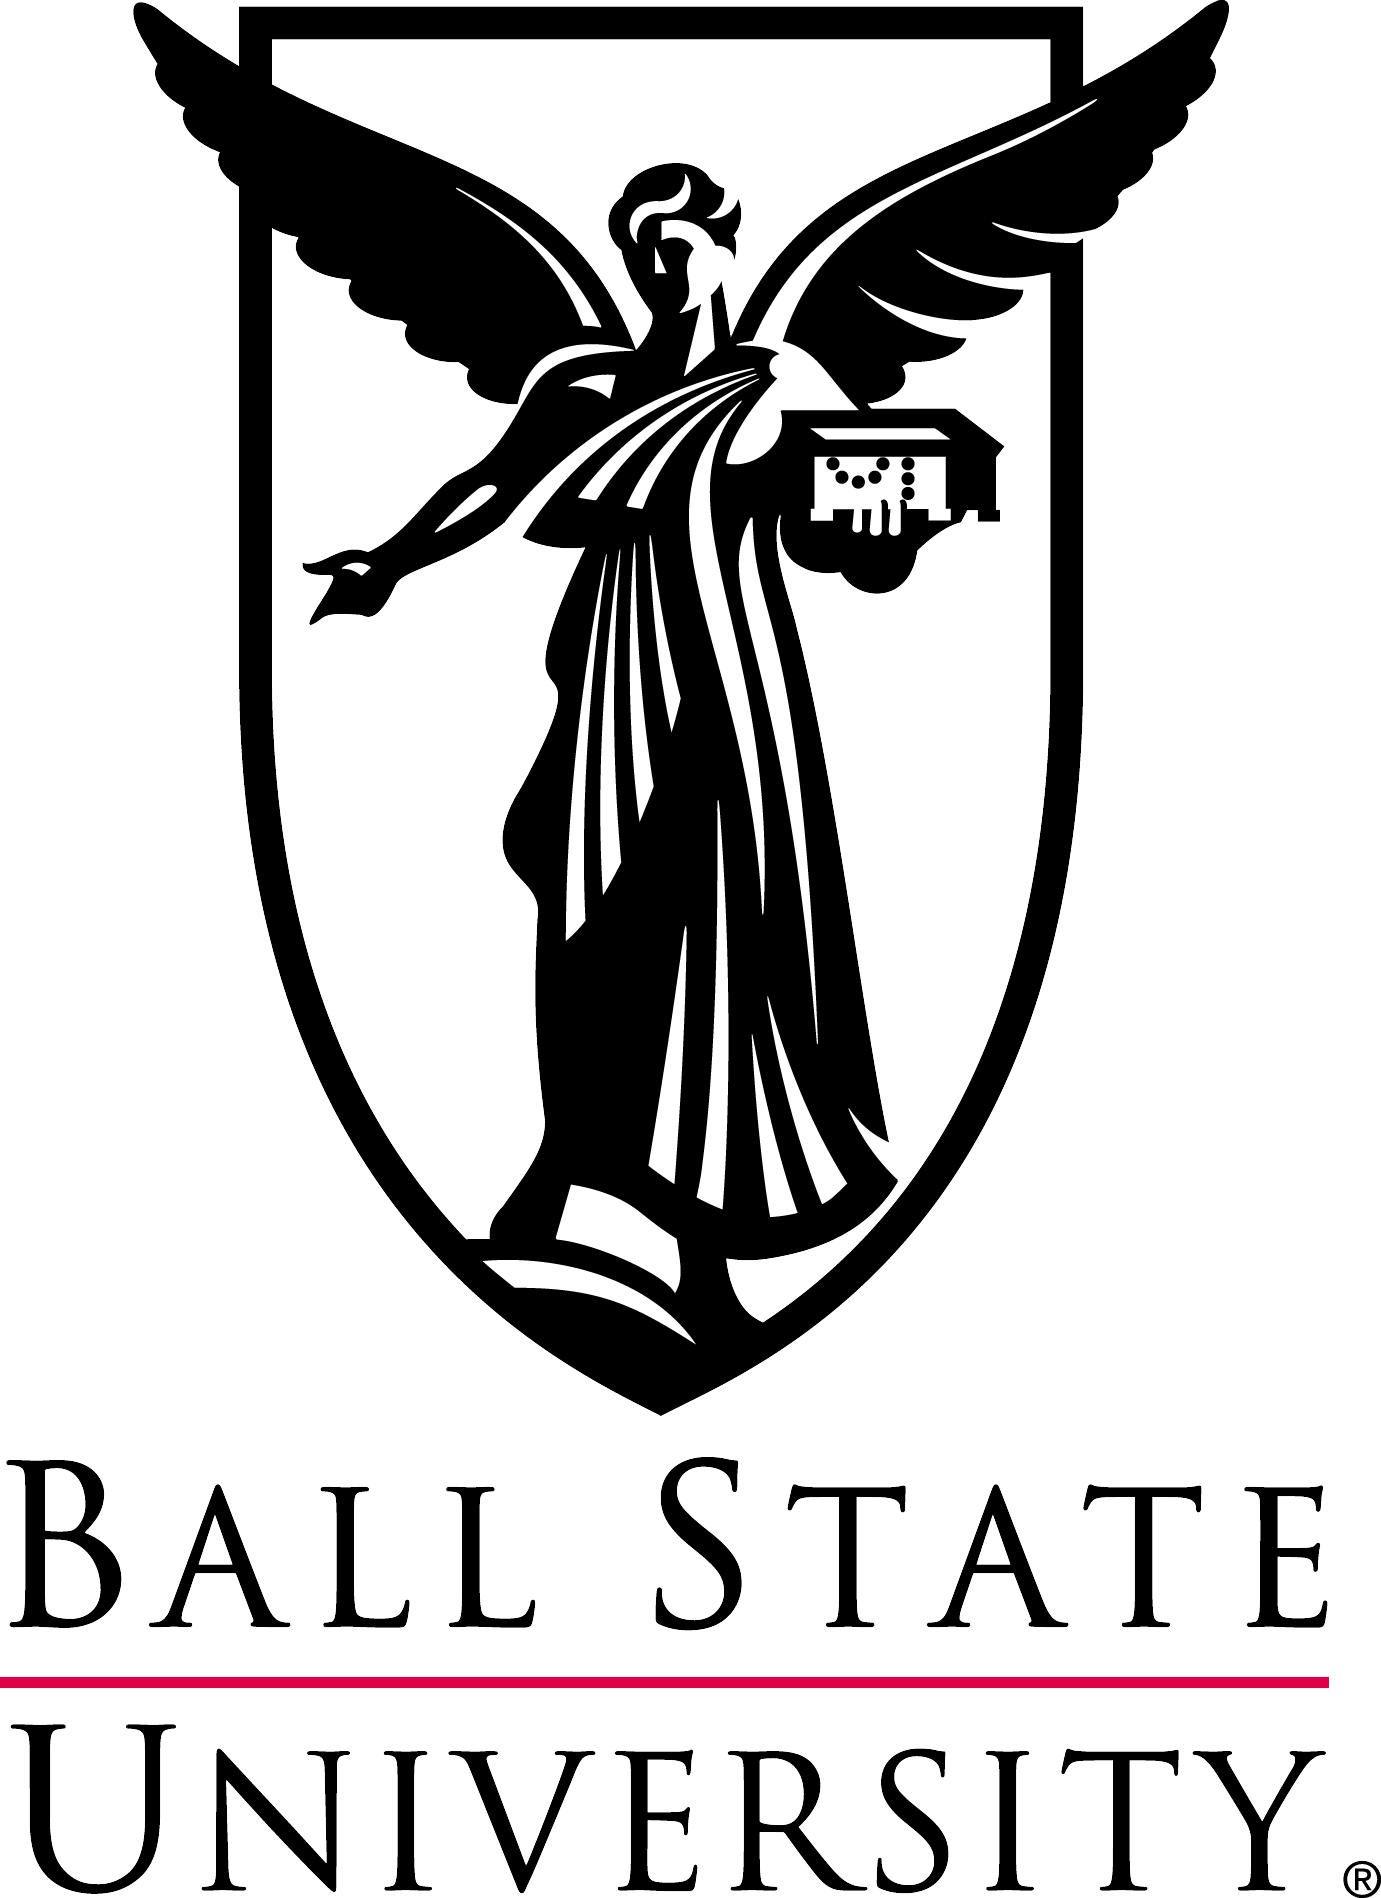 Court State of Indiana Logo - Supreme Court Hears Martial Arts Injury Case At Ball State